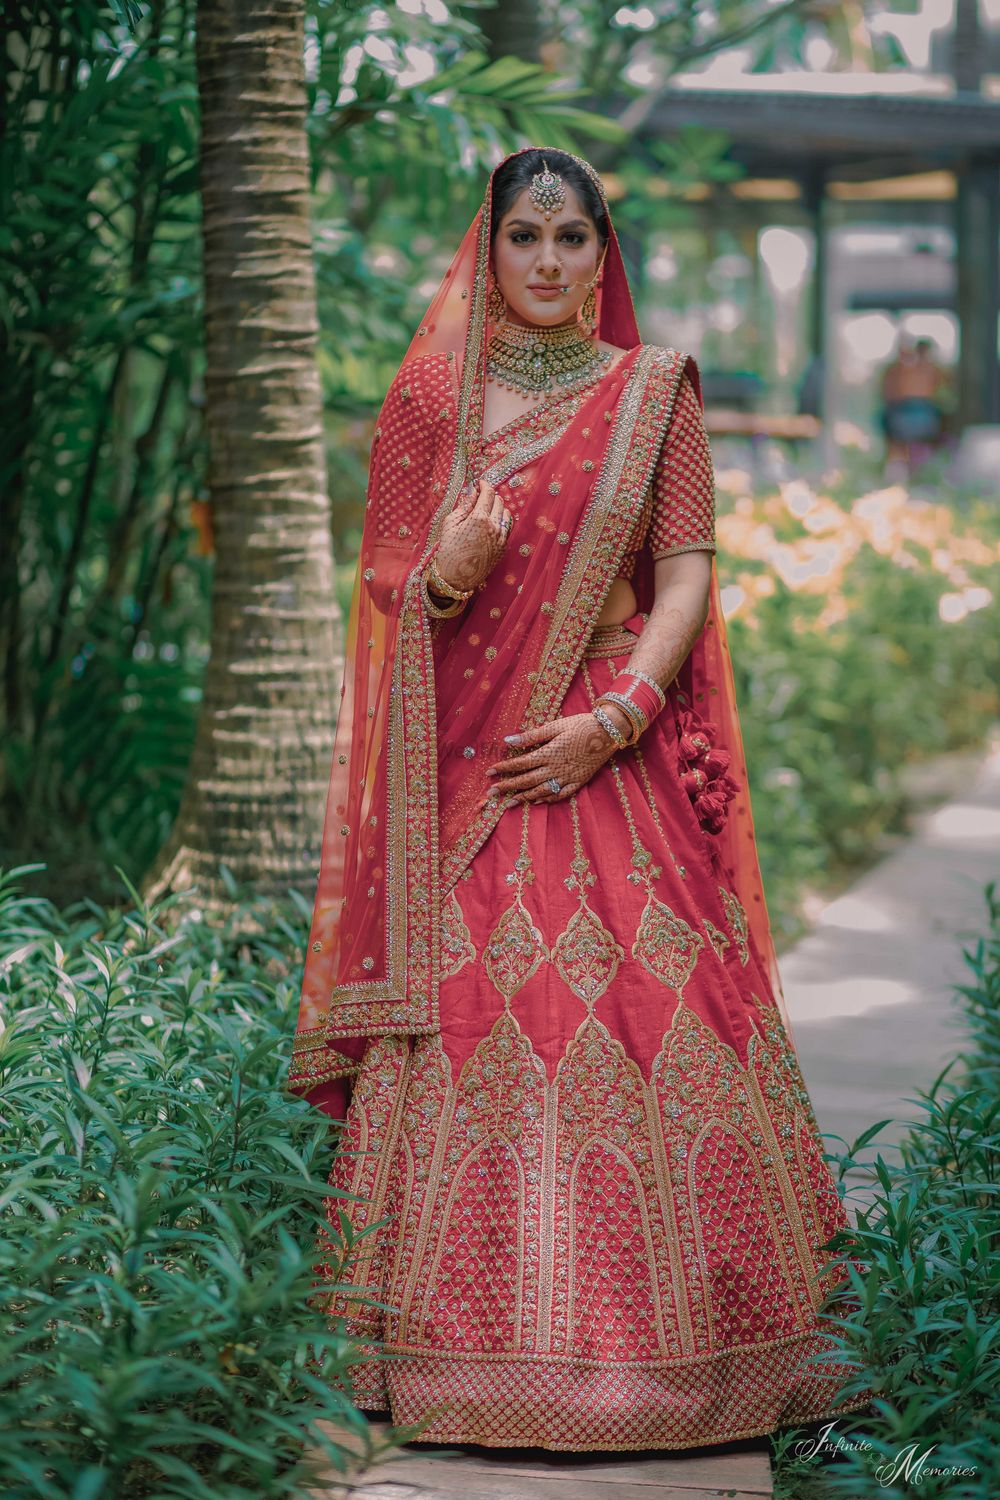 Photo of Bride in red with embroidered bridal lehenga